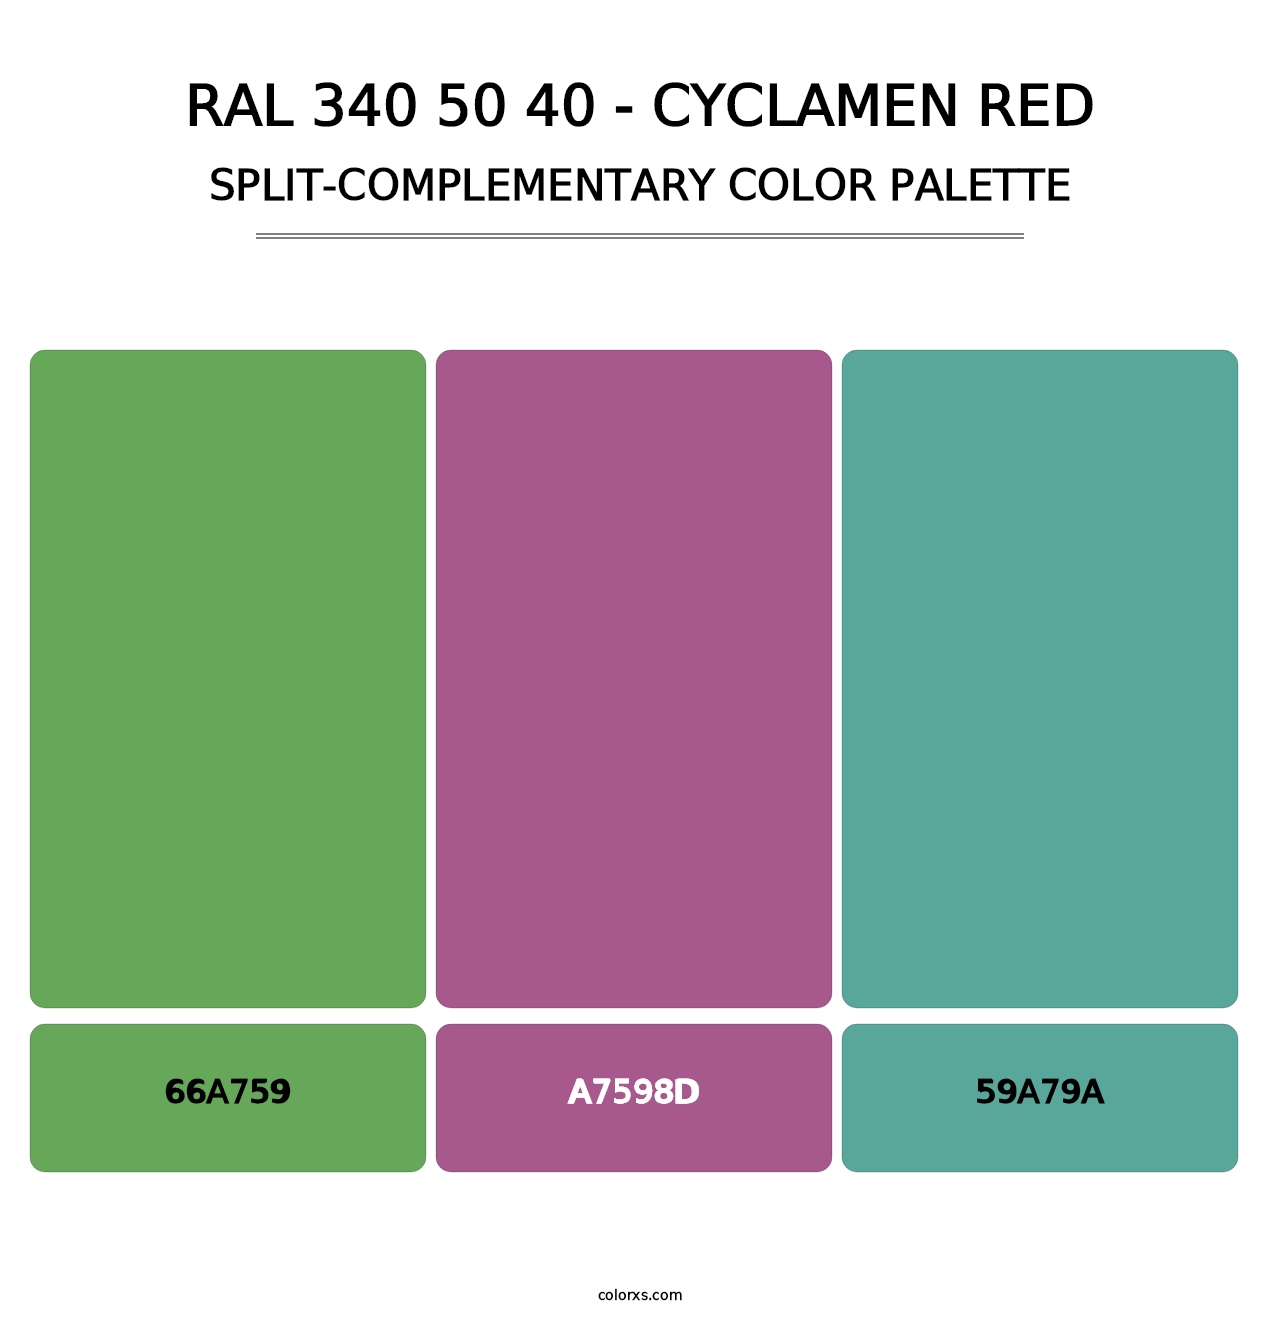 RAL 340 50 40 - Cyclamen Red - Split-Complementary Color Palette